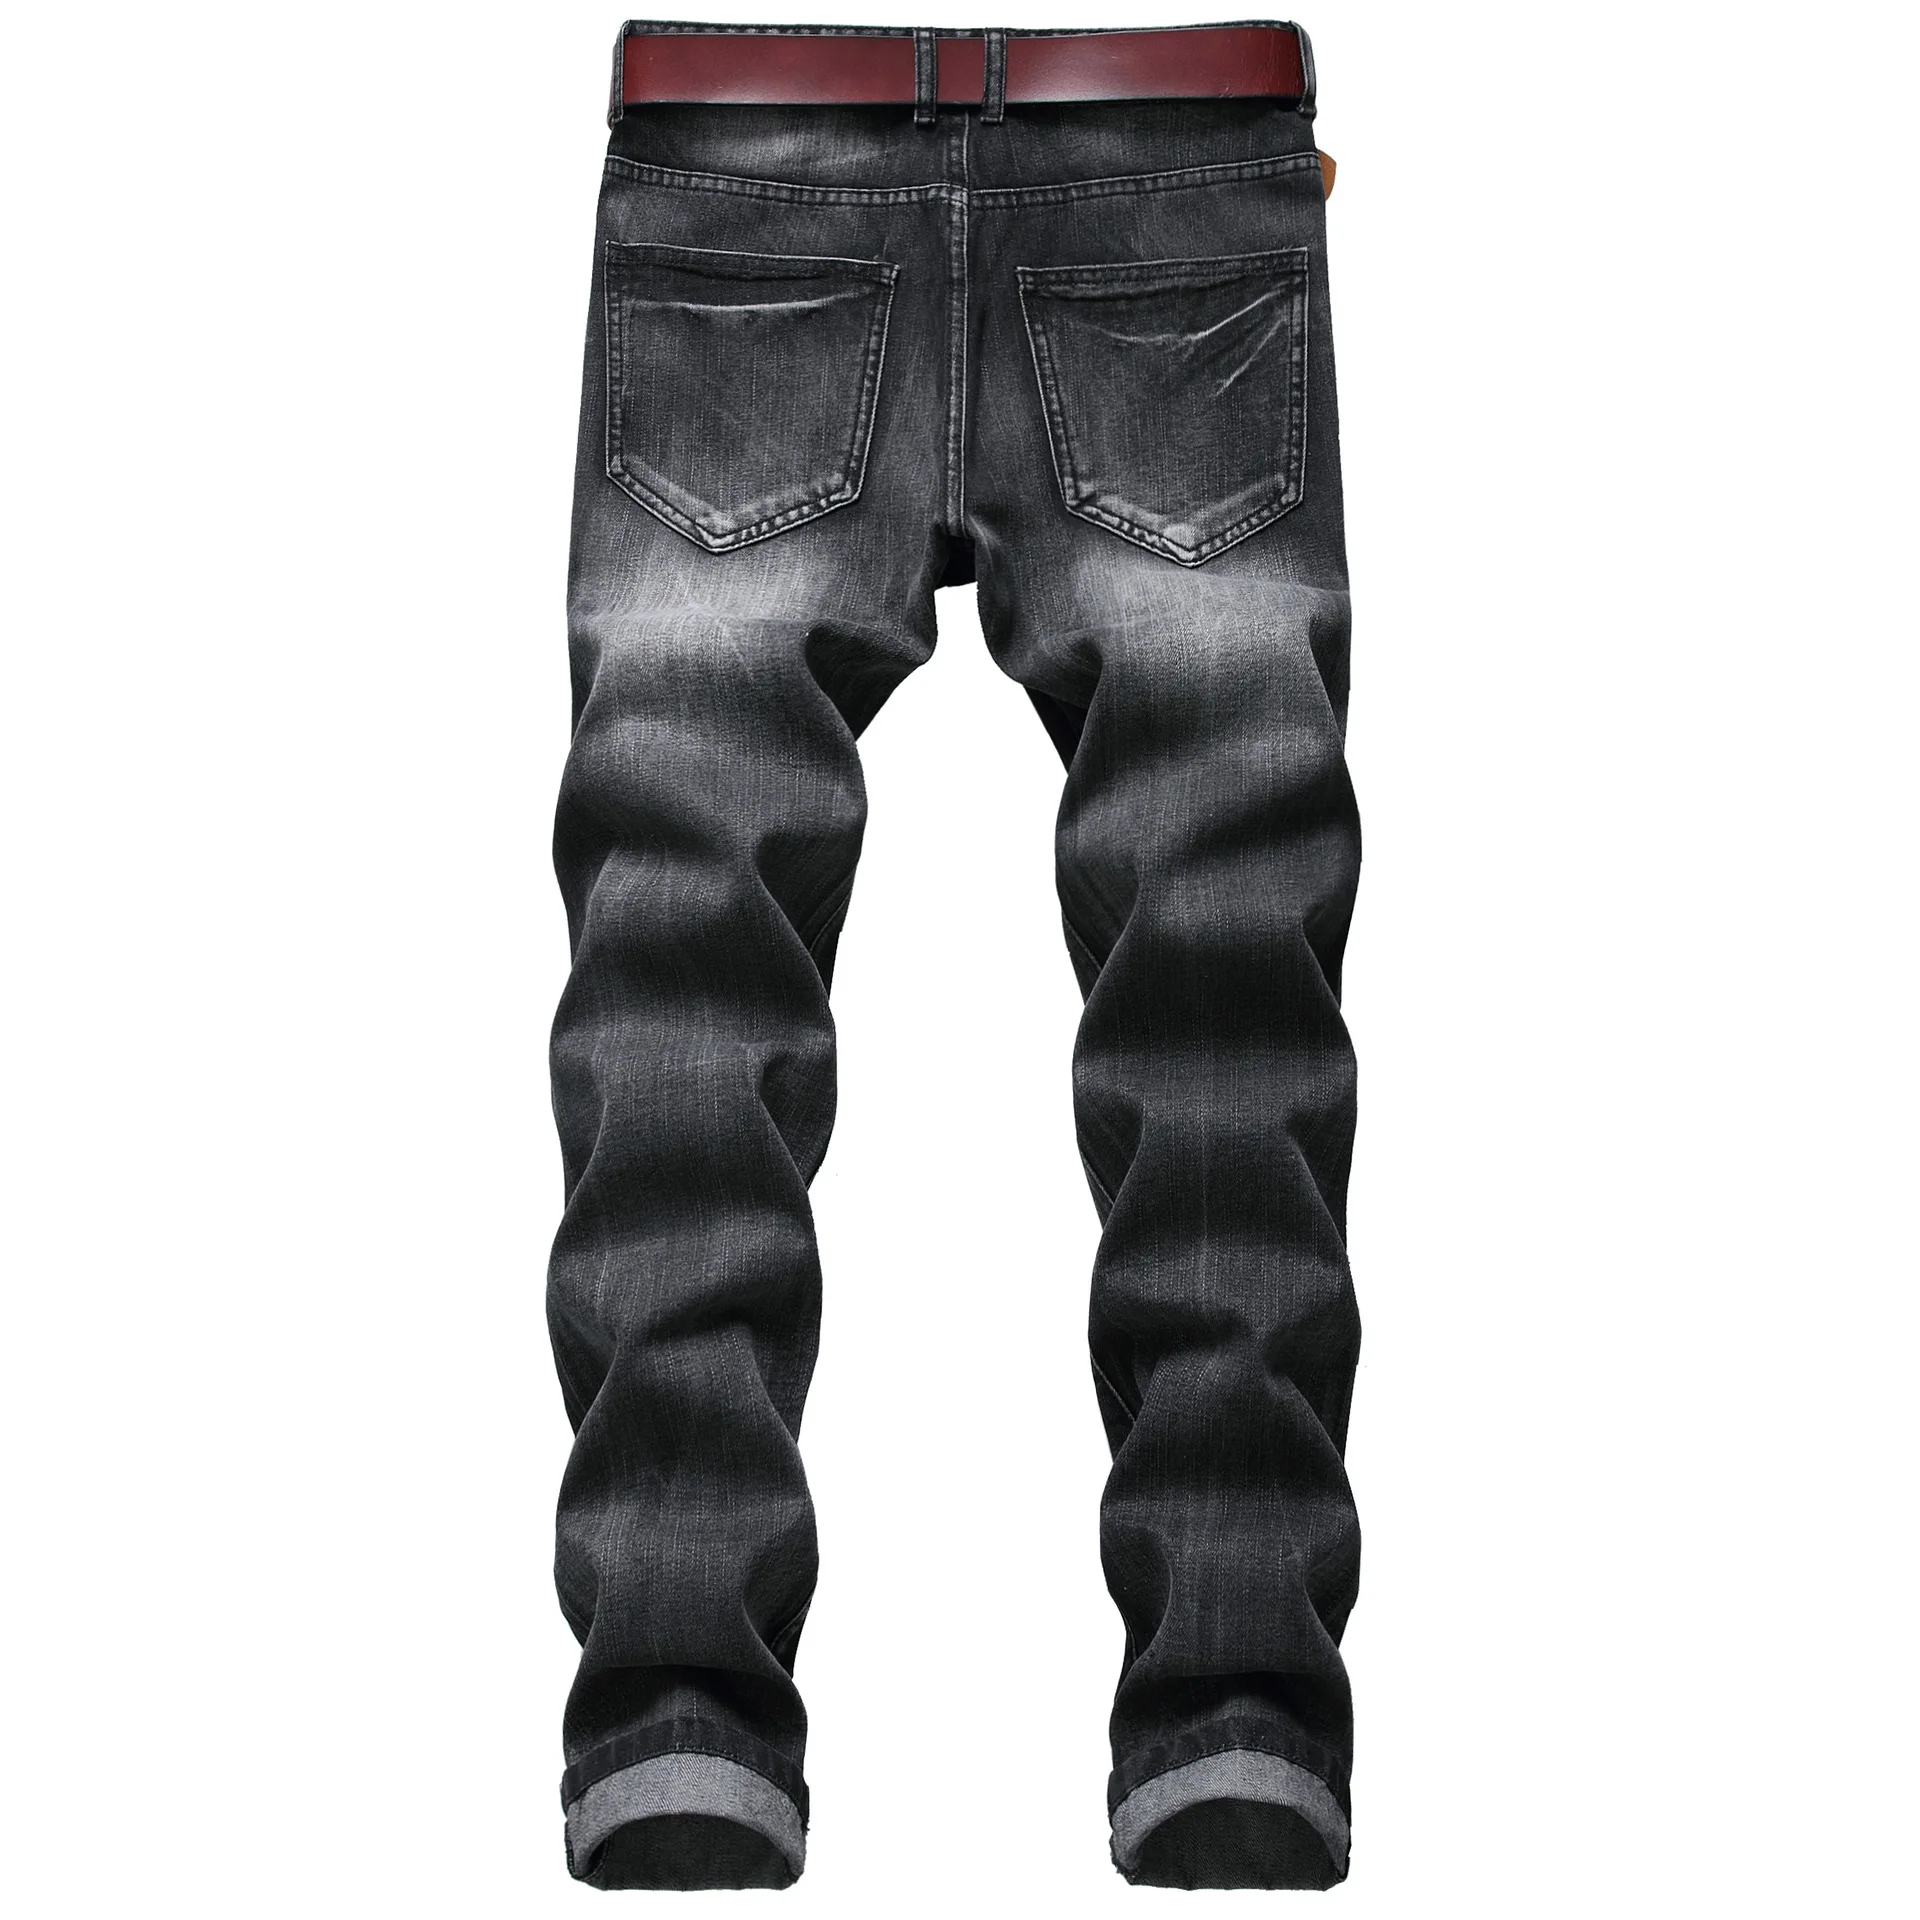 Popular Men's Jeans Thick Style Men's Jeans Destroyed Fashion Brand ...